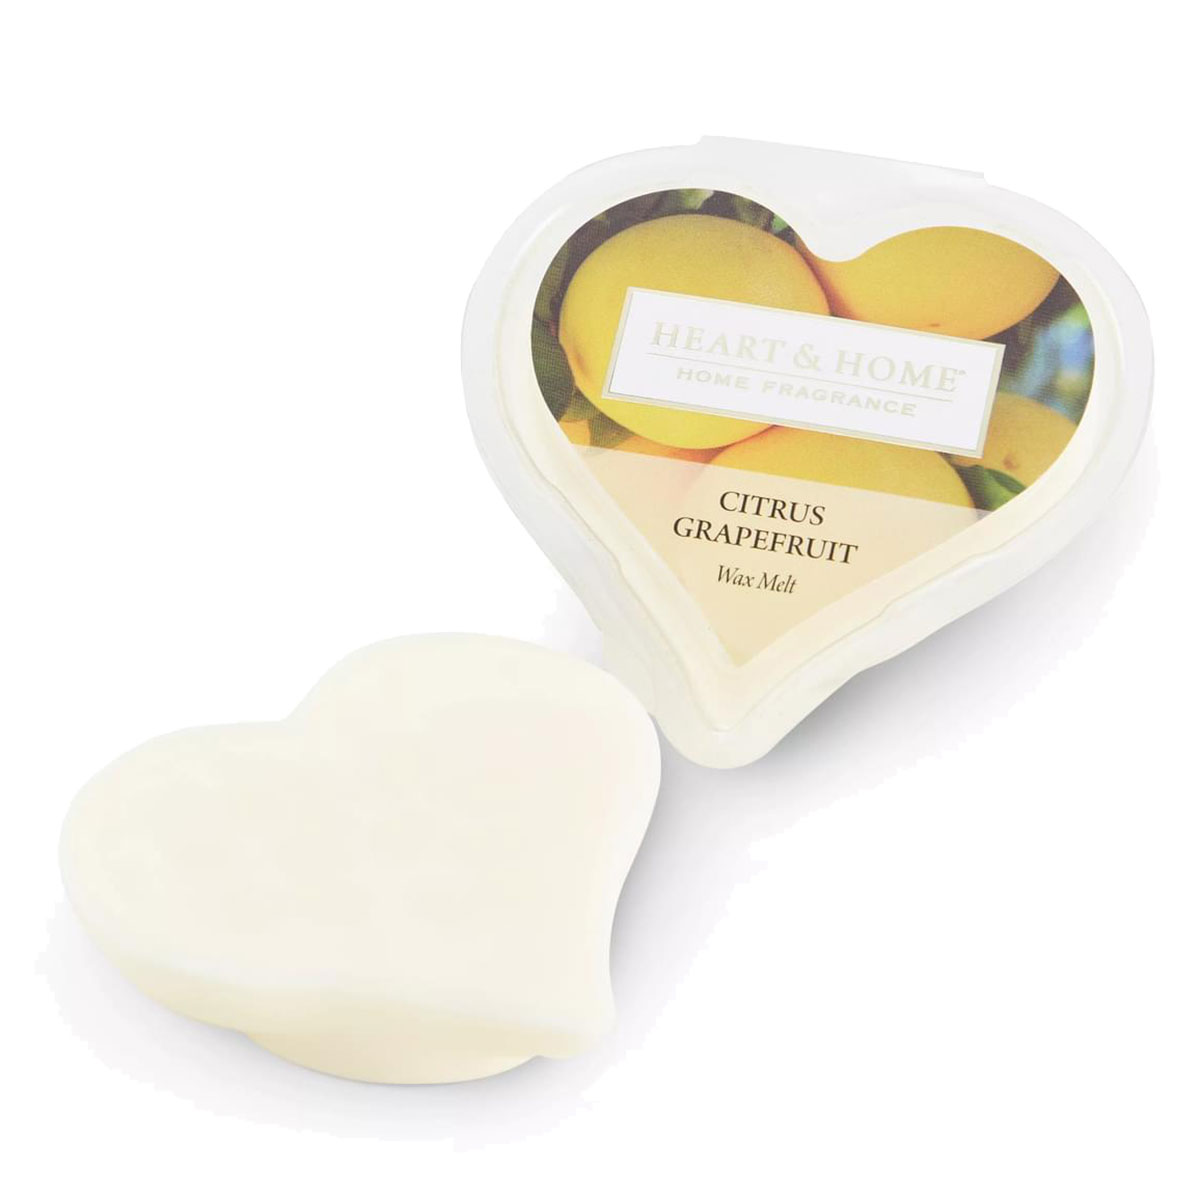 Heart and Home Wax Melts - Grapefruit and Citrus - 12 hours